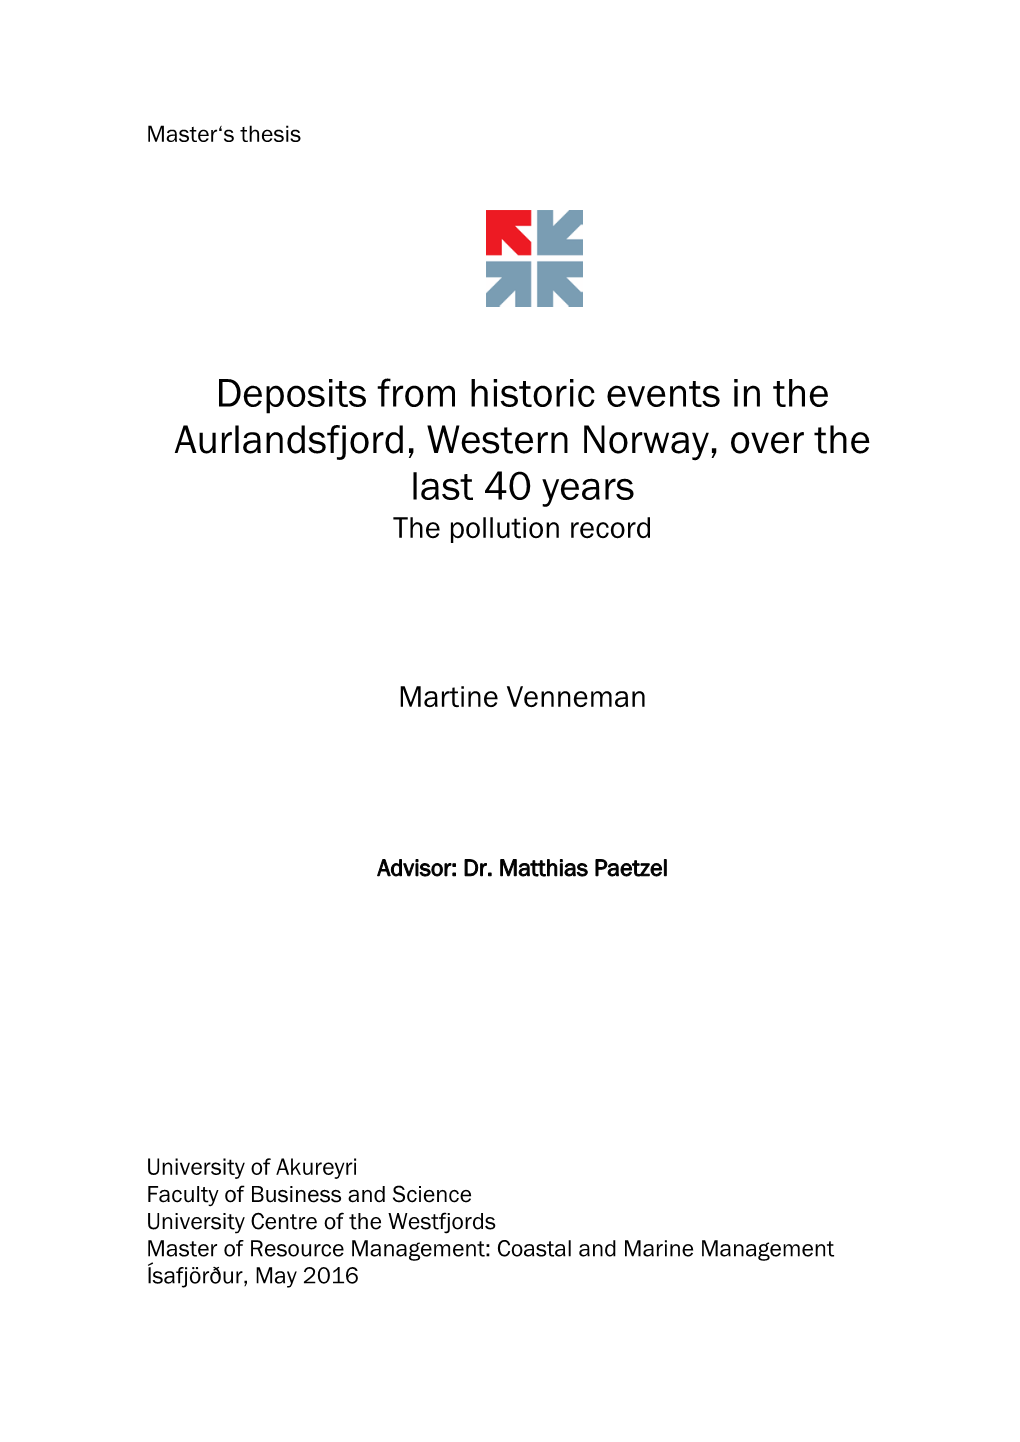 Deposits from Historic Events in the Aurlandsfjord, Western Norway, Over the Last 40 Years the Pollution Record